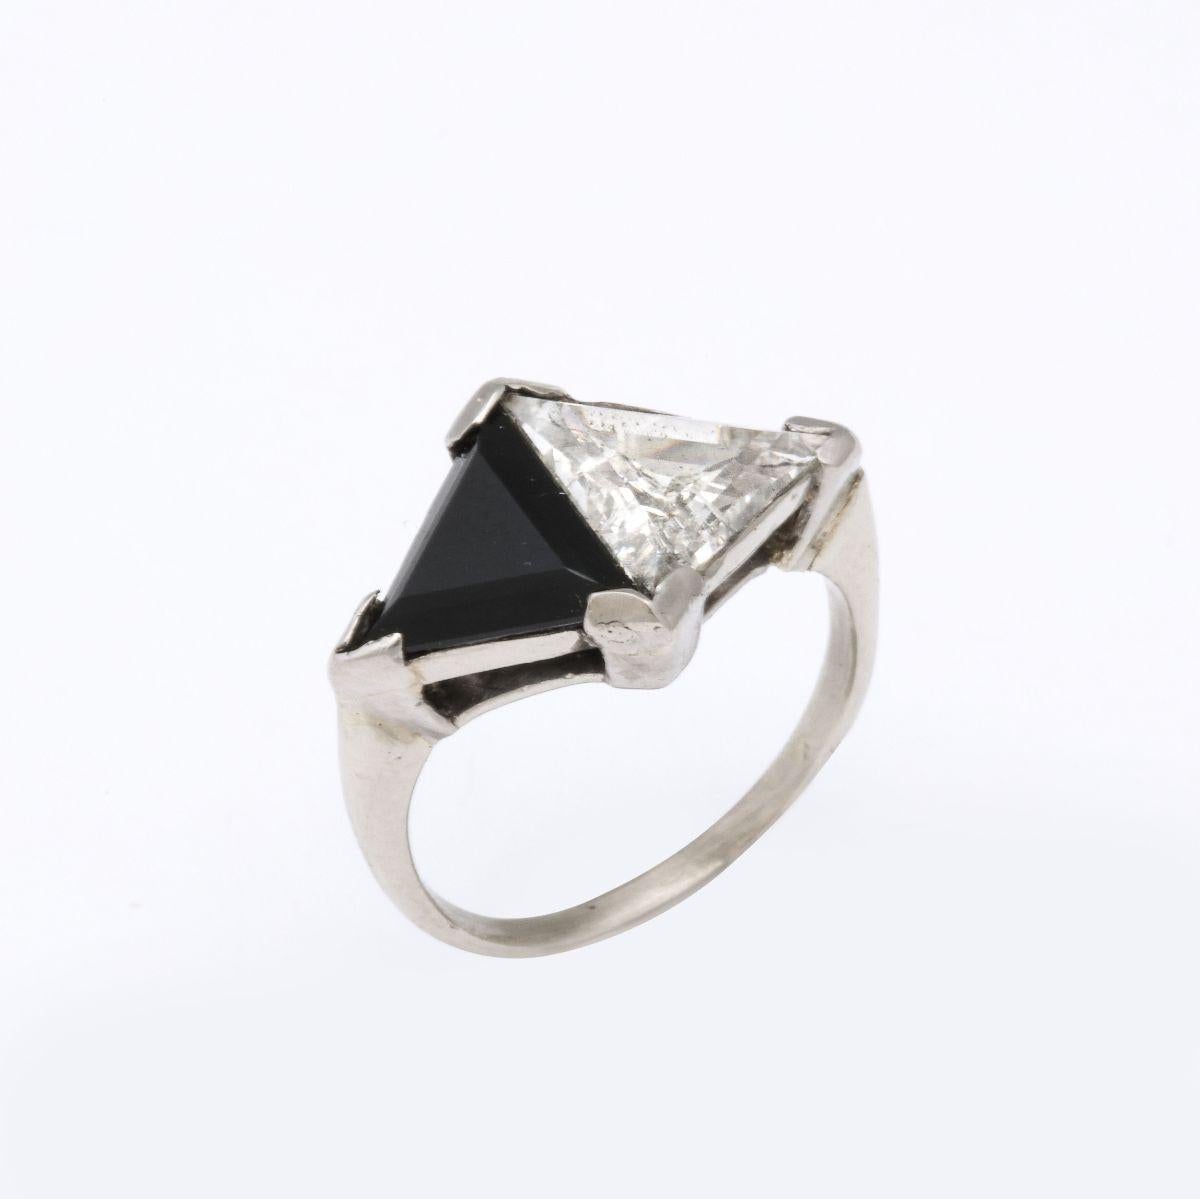 A stunning rare Art Deco Design triangular diamond and onyx vintage ring set in a classic original platinum band. Diamond This is a rare cut and exceptional size to find in a vintage ring and black and white is most desirable c 1940

